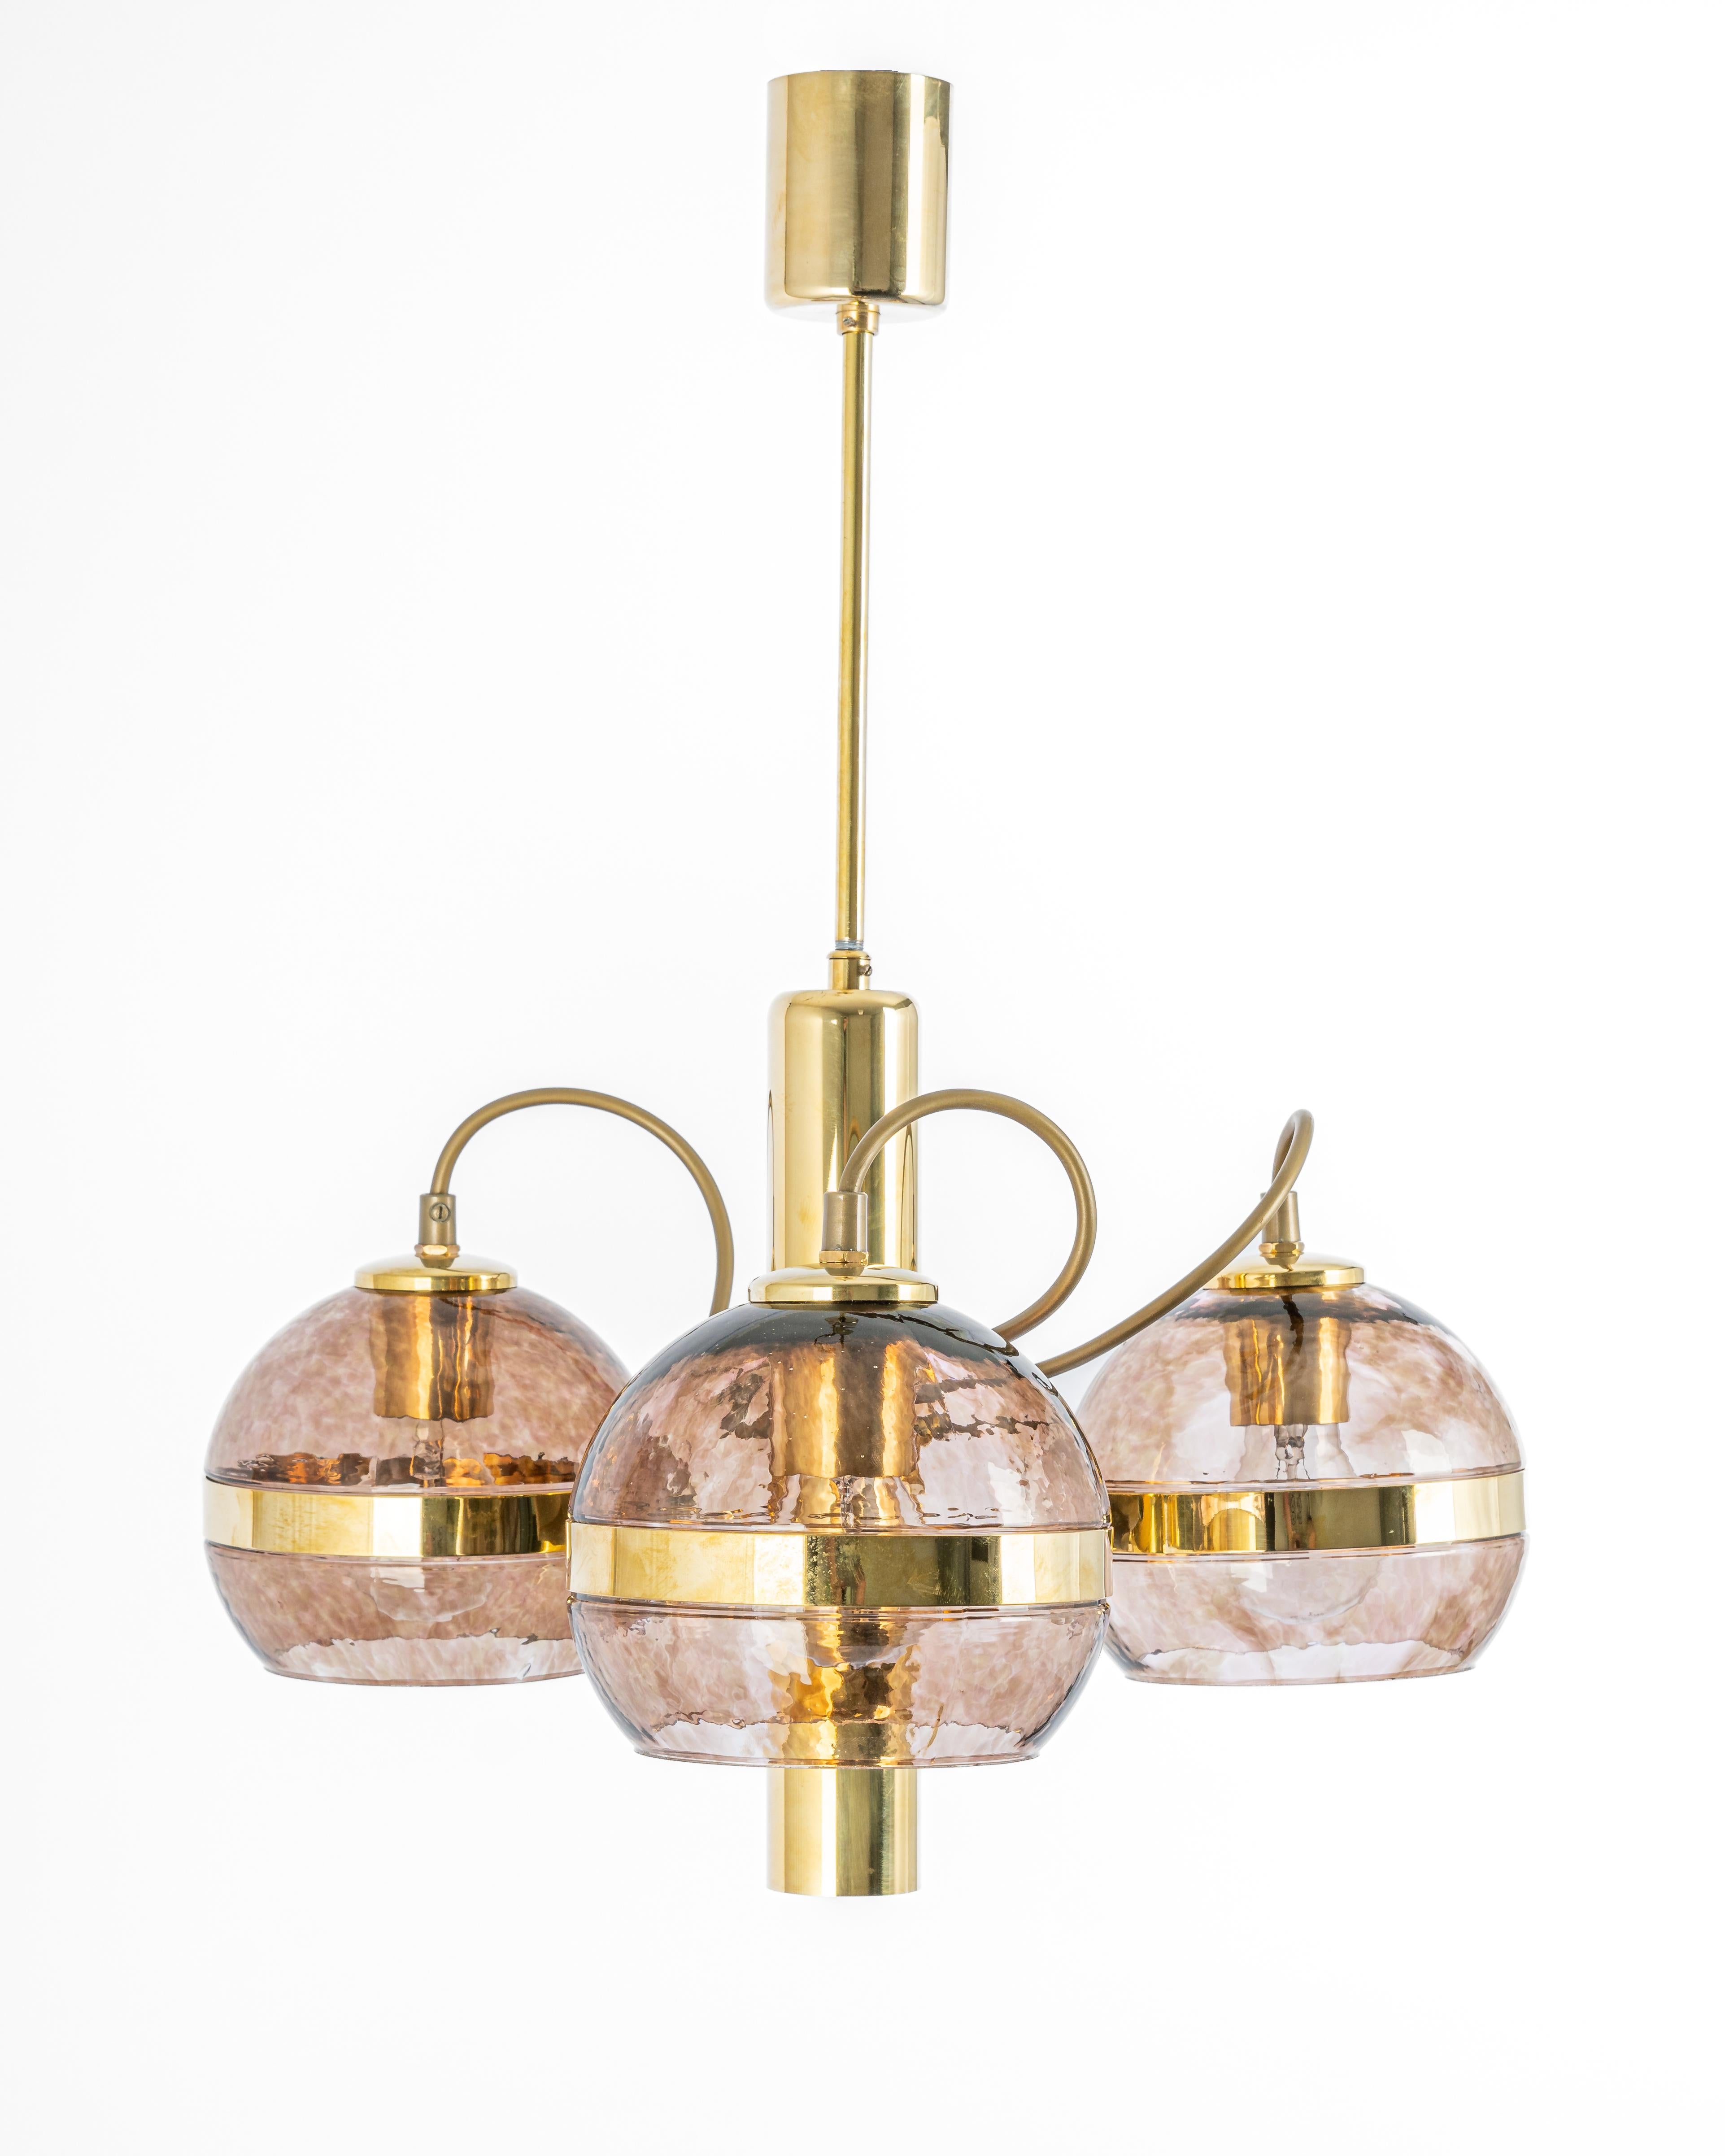 Petite 3-light brass chandelier in the style of Sciolari.
Smoked glass in a very beautiful smokey brown color.
Made with brass, best of the 1960s.

High quality and in very good condition. Cleaned, well-wired and ready to use. 

The fixture requires